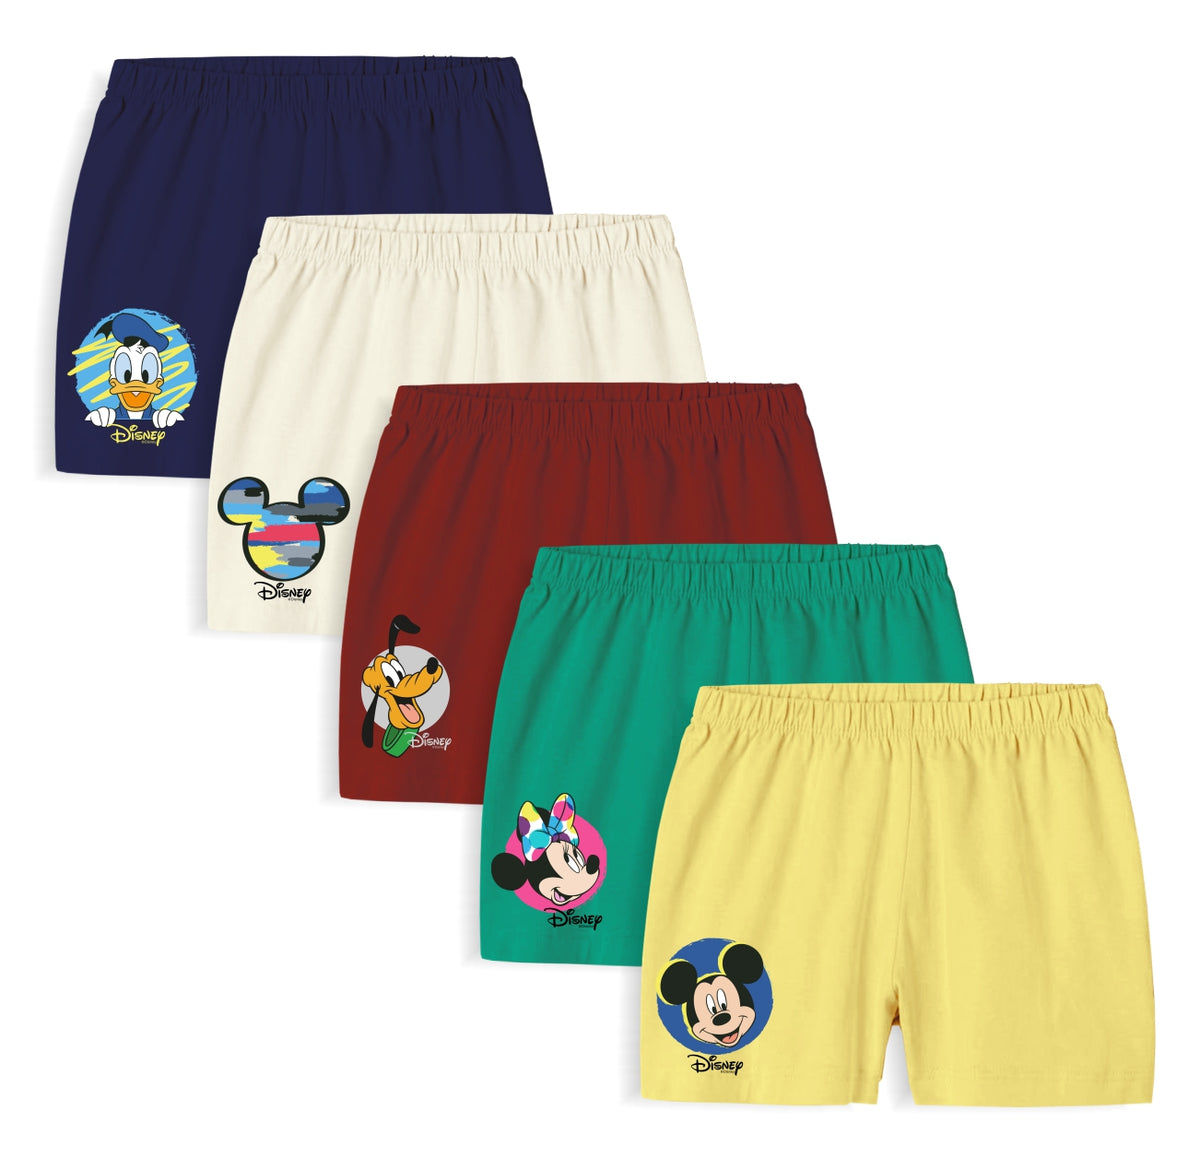 Minicult Kids Shorts with Mickey and Friends Character Prints (Pack of 5)